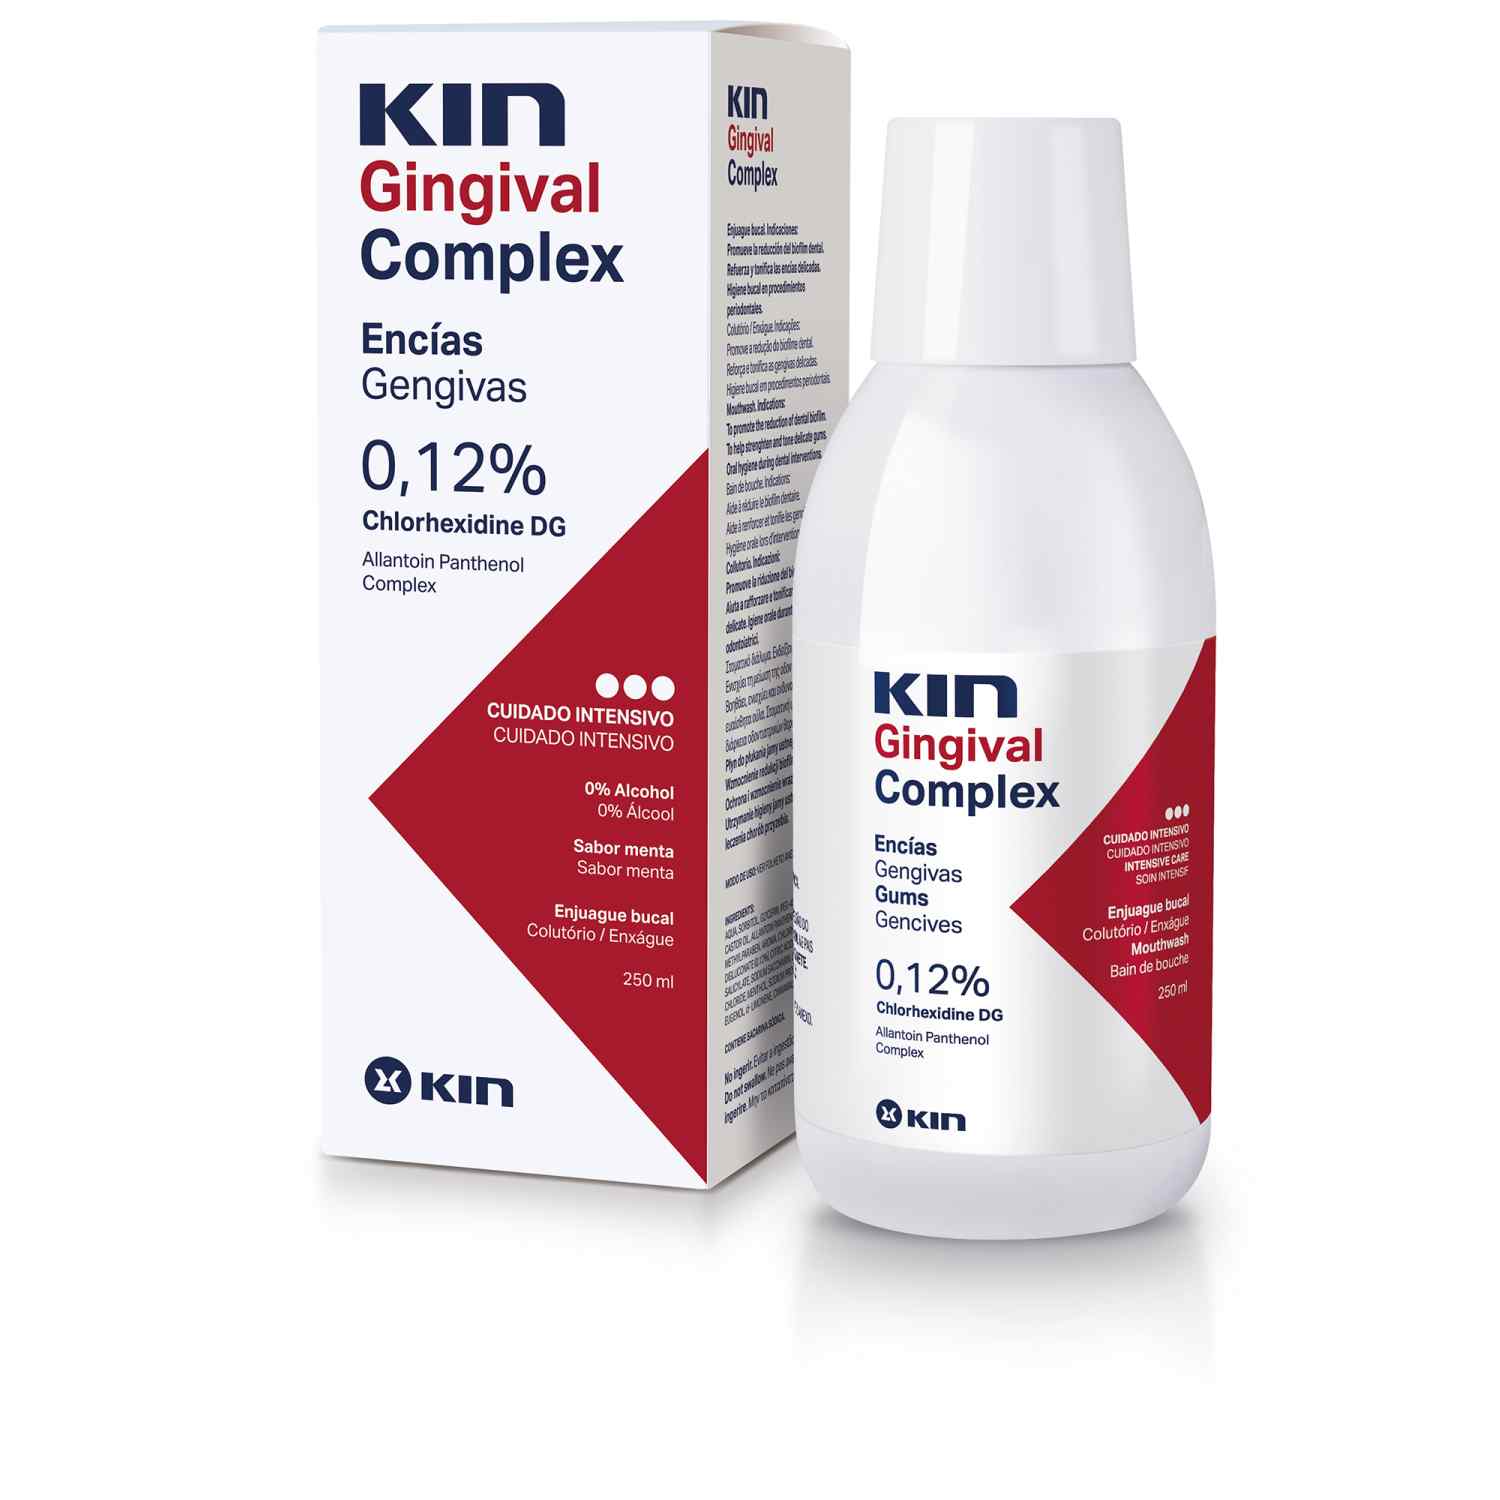 kin complexe gingival